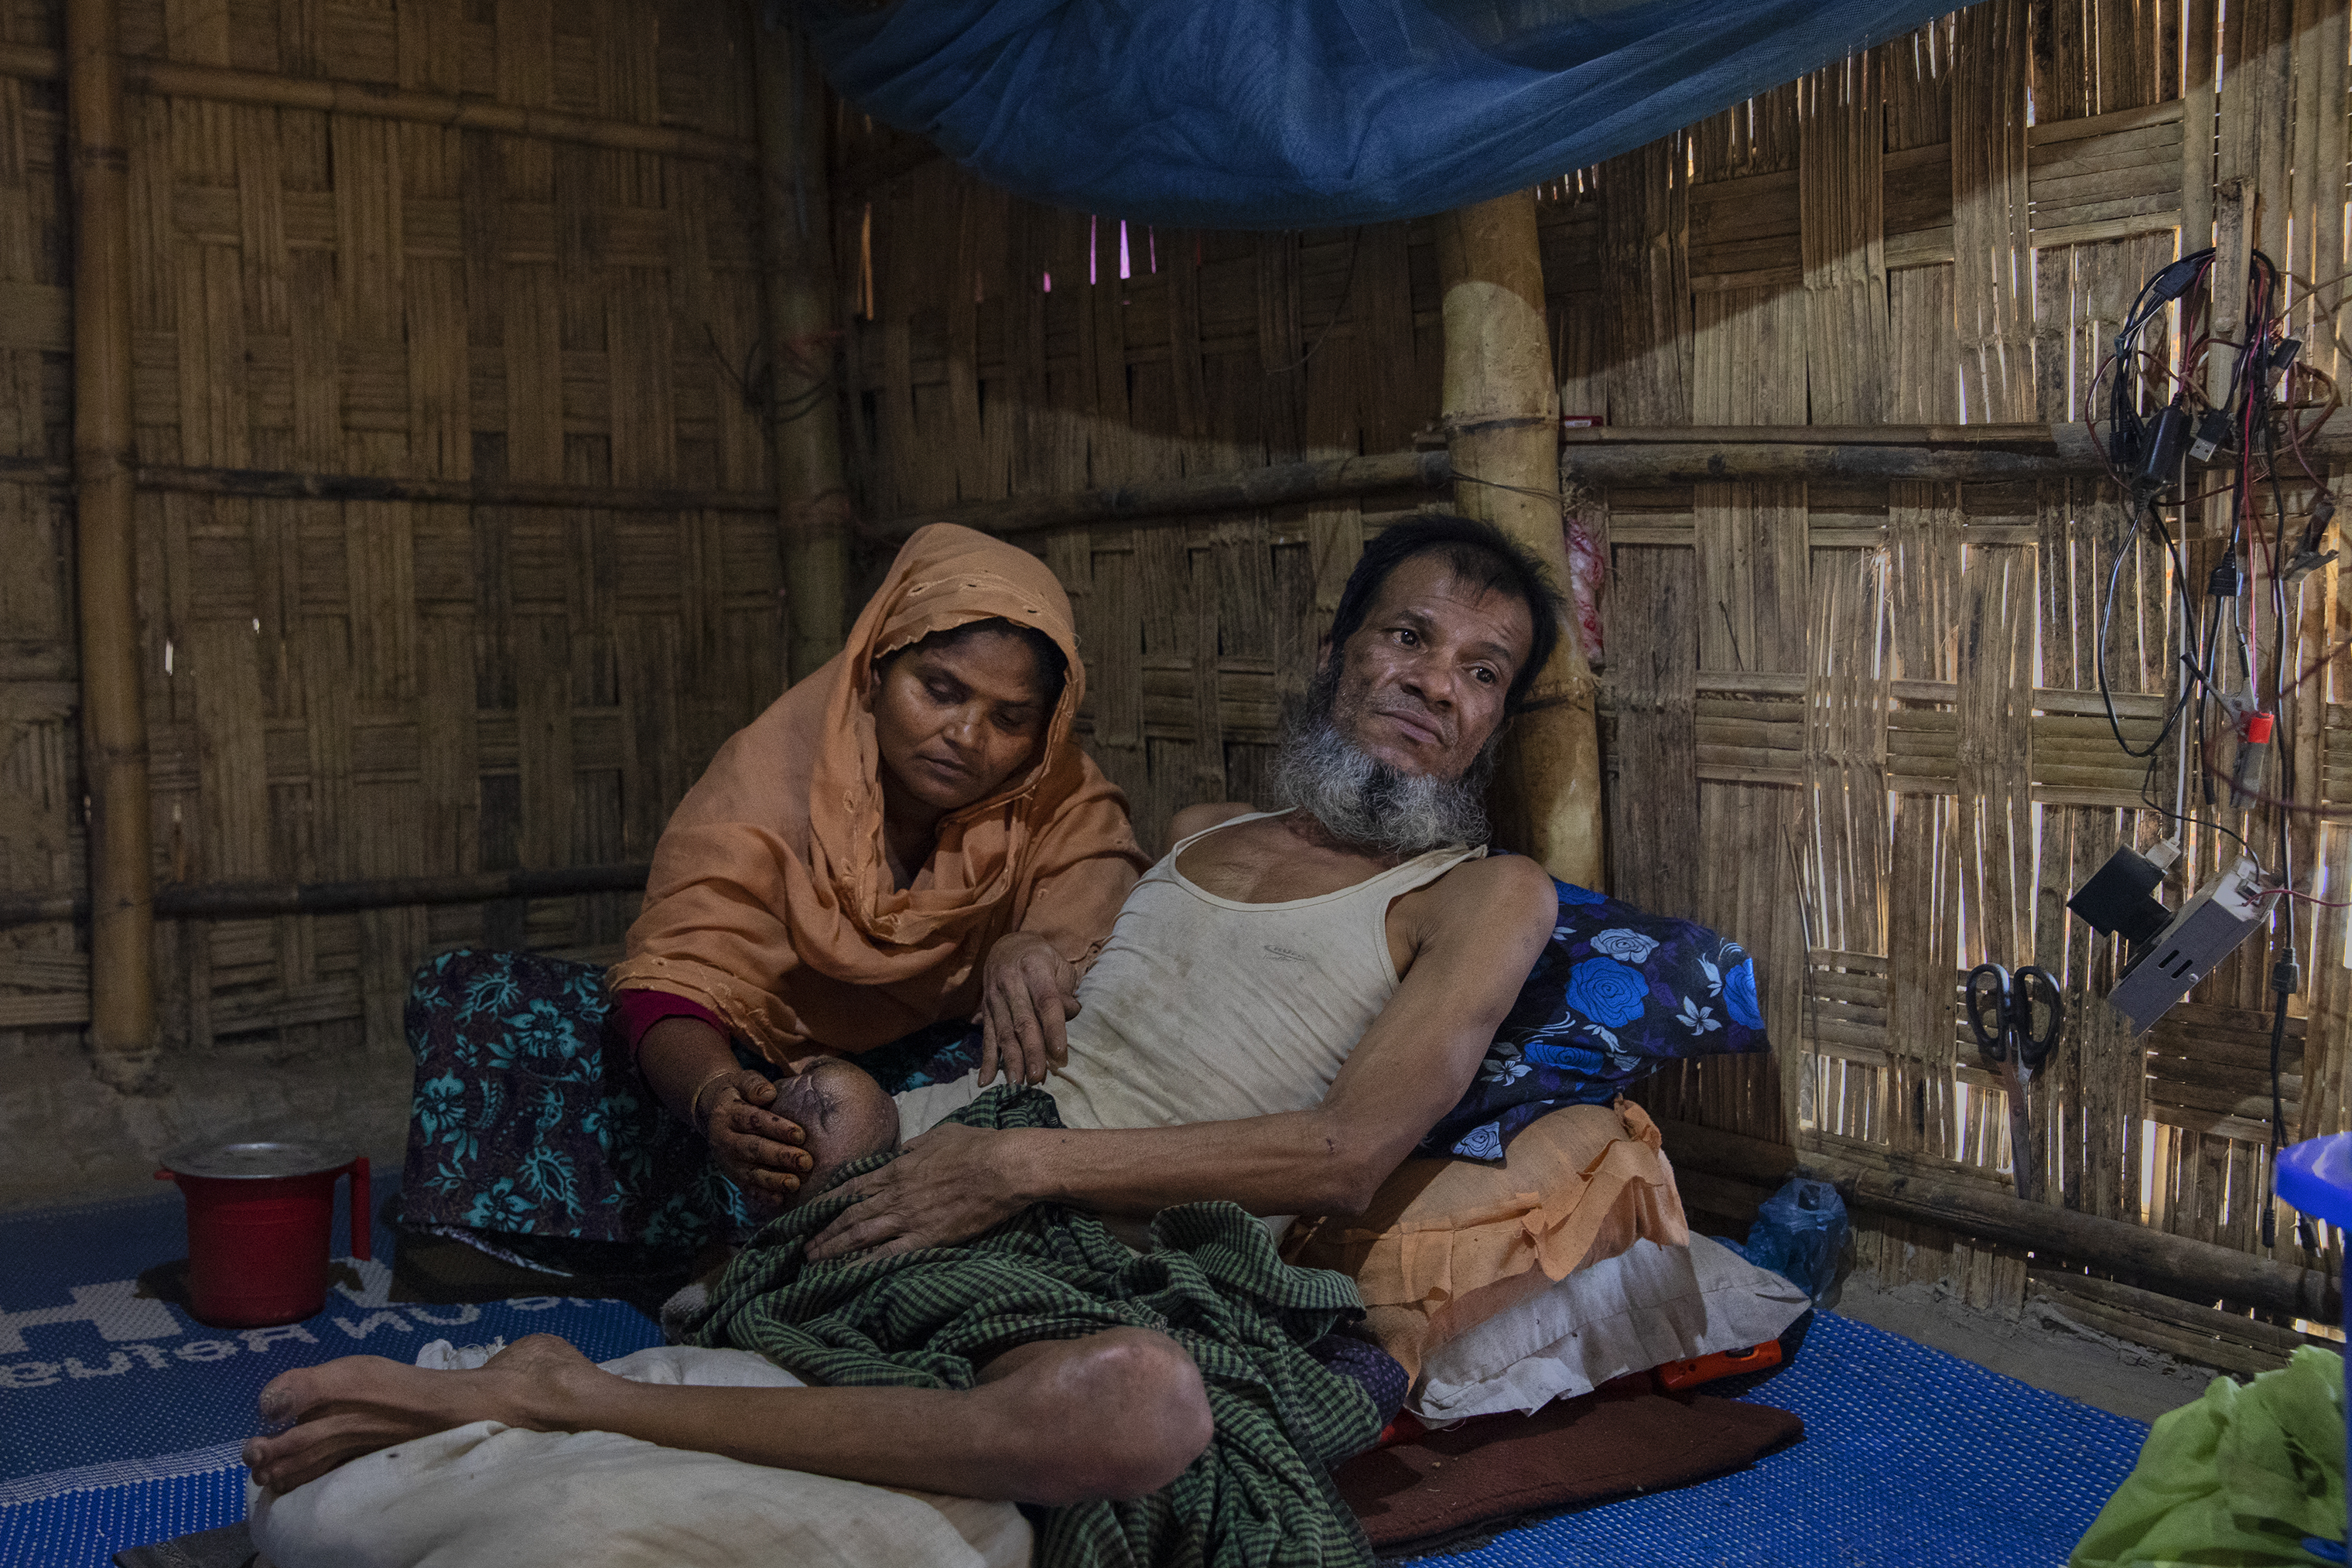 Inan Hossein, with his wife Halema Khatun, lost his leg to a gunshot from a government soldier in Myanmar. (James Nachtwey for TIME)